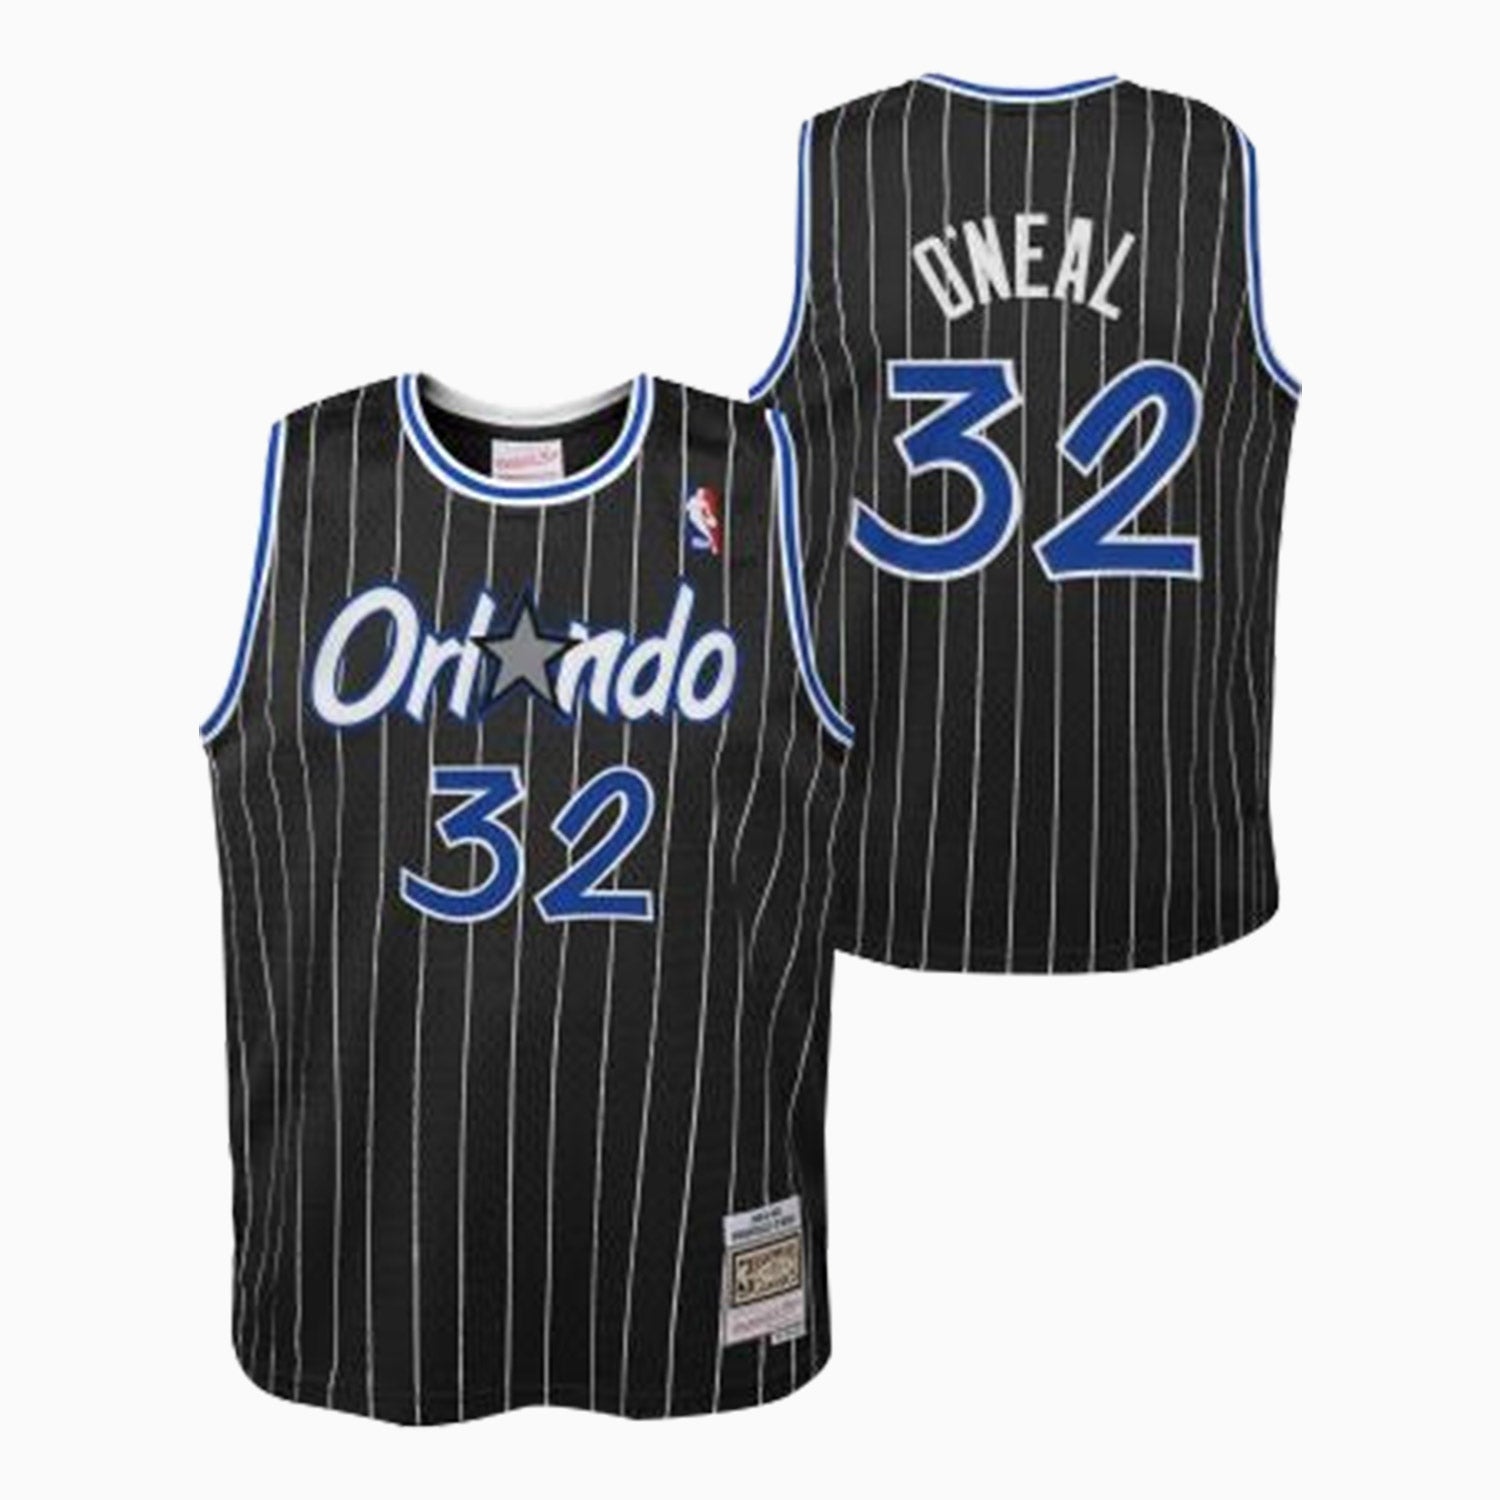 mitchell-ness-swingman-shaquille-o-neal-orlando-magic-1994-95-nba-jersey-toddlers-9n2t1blt0-magos-y94